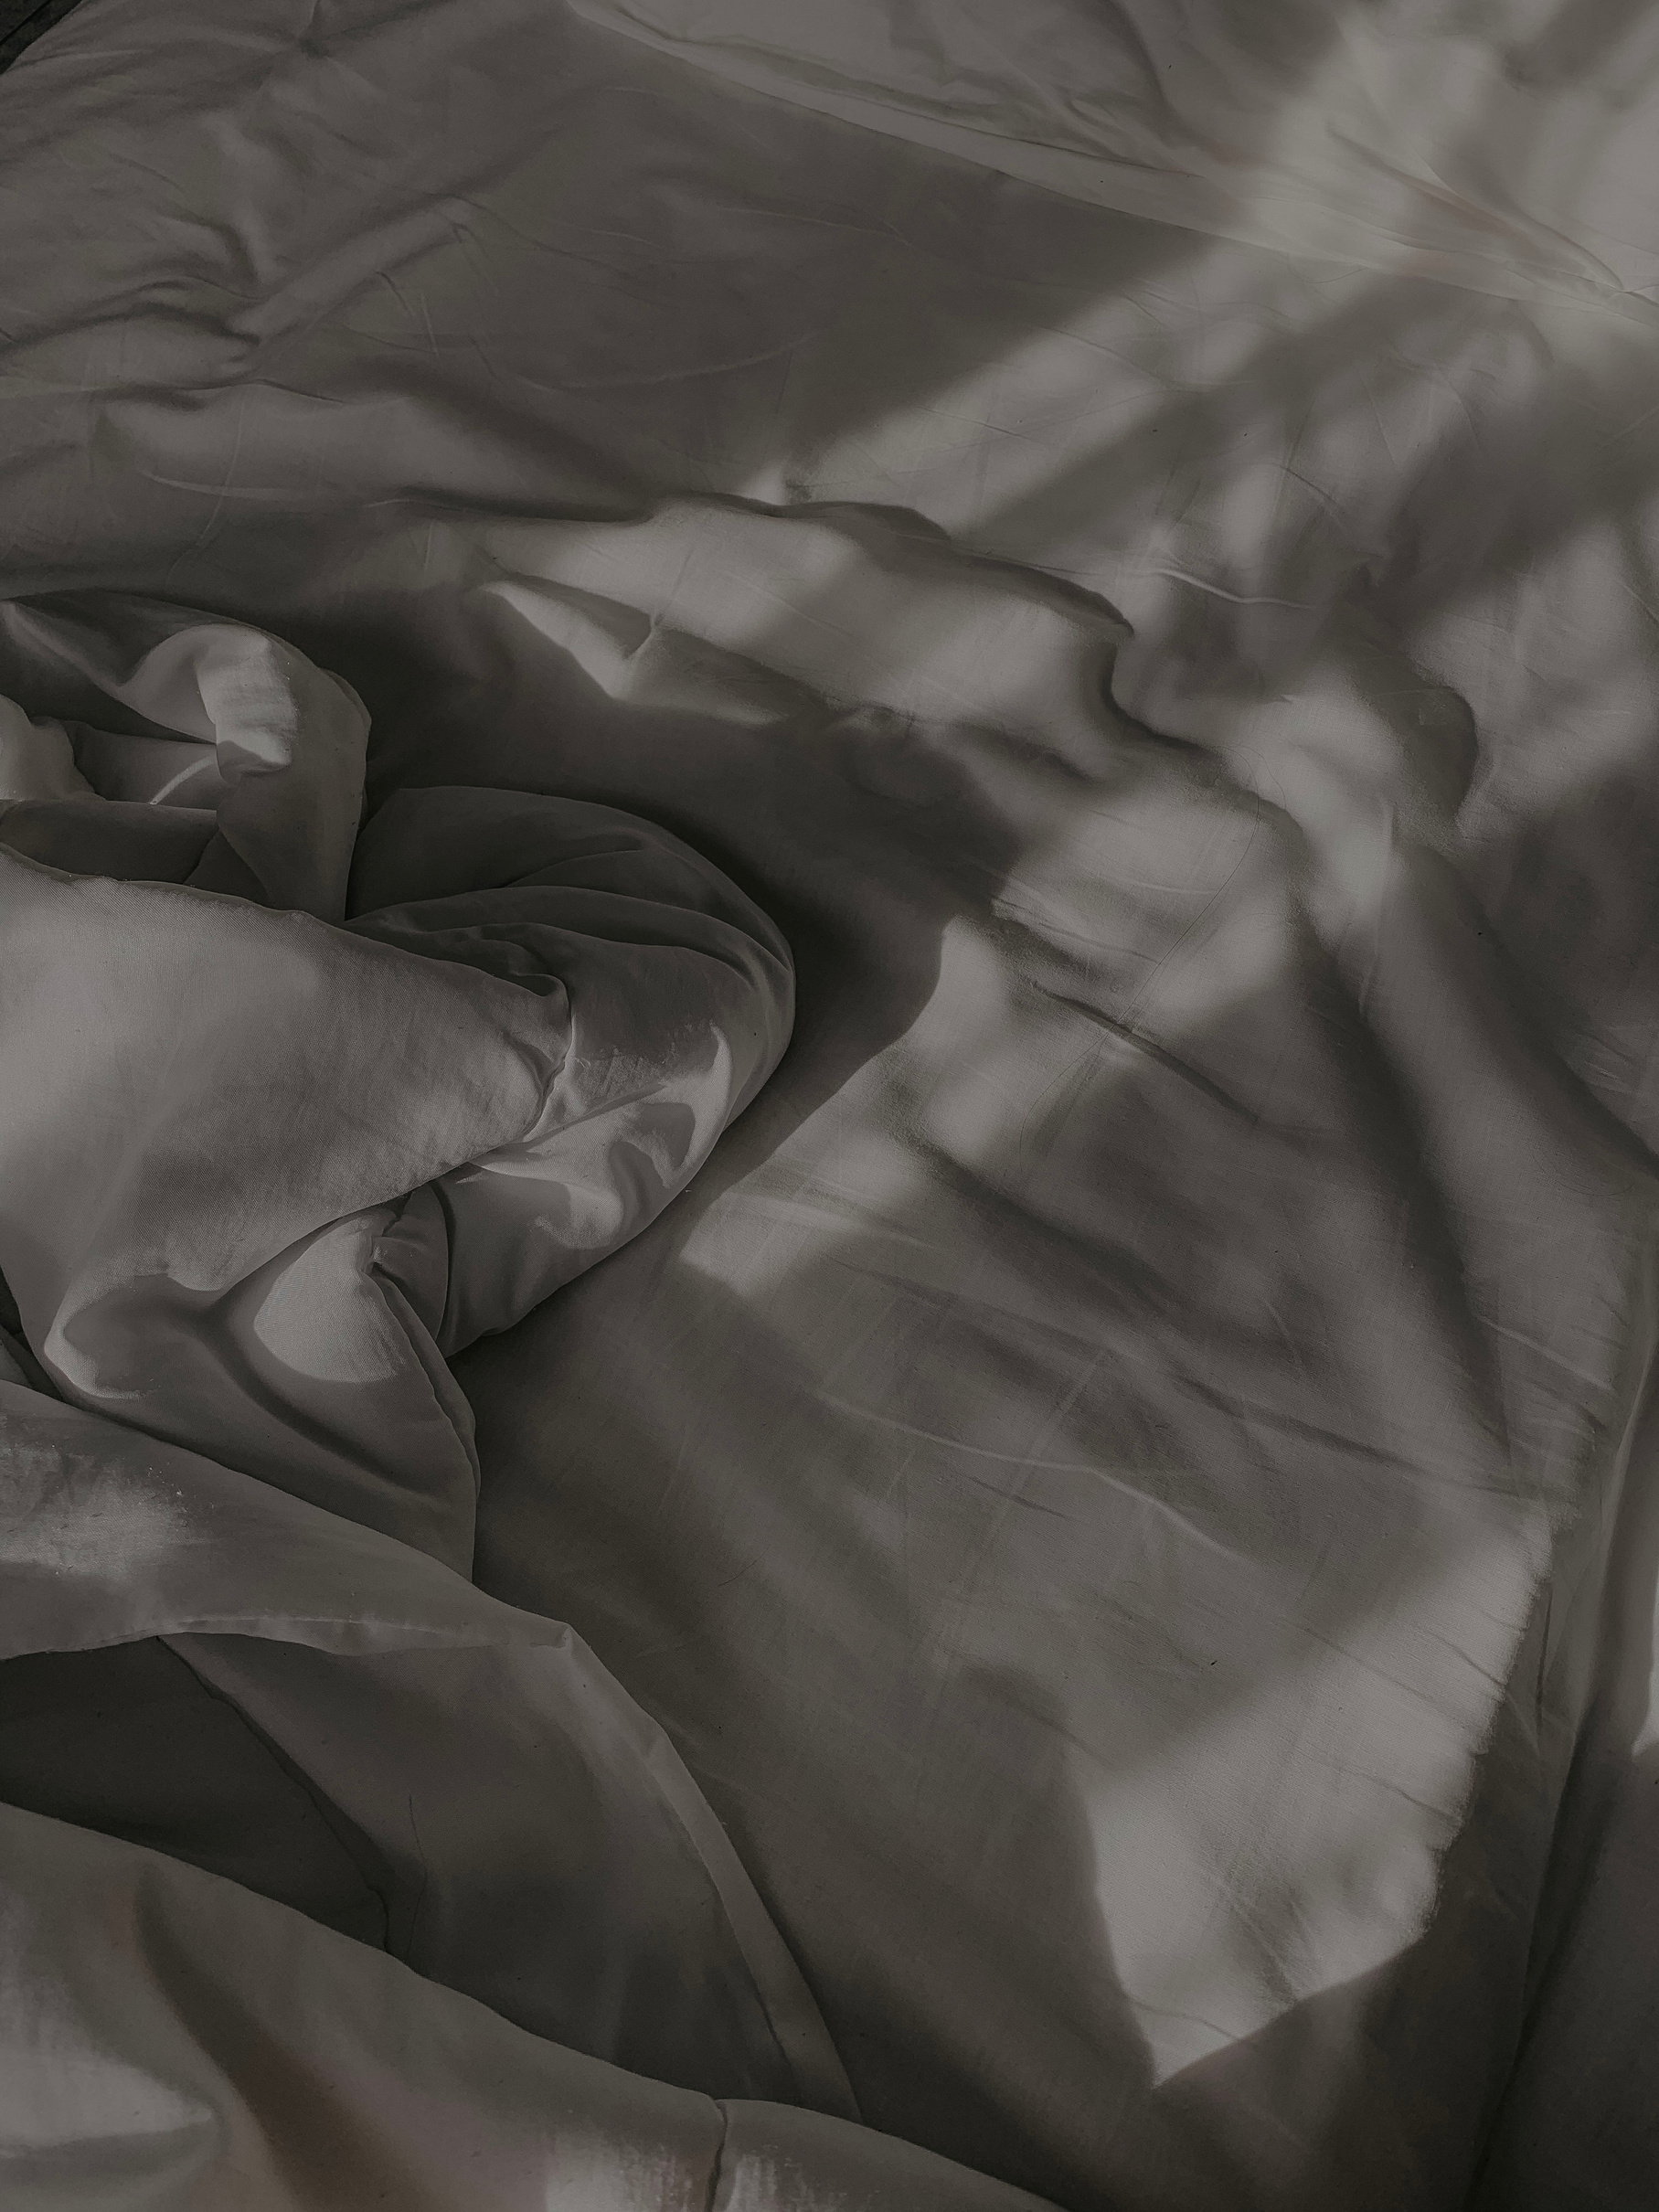 Grayscale Photo of a White Fabric